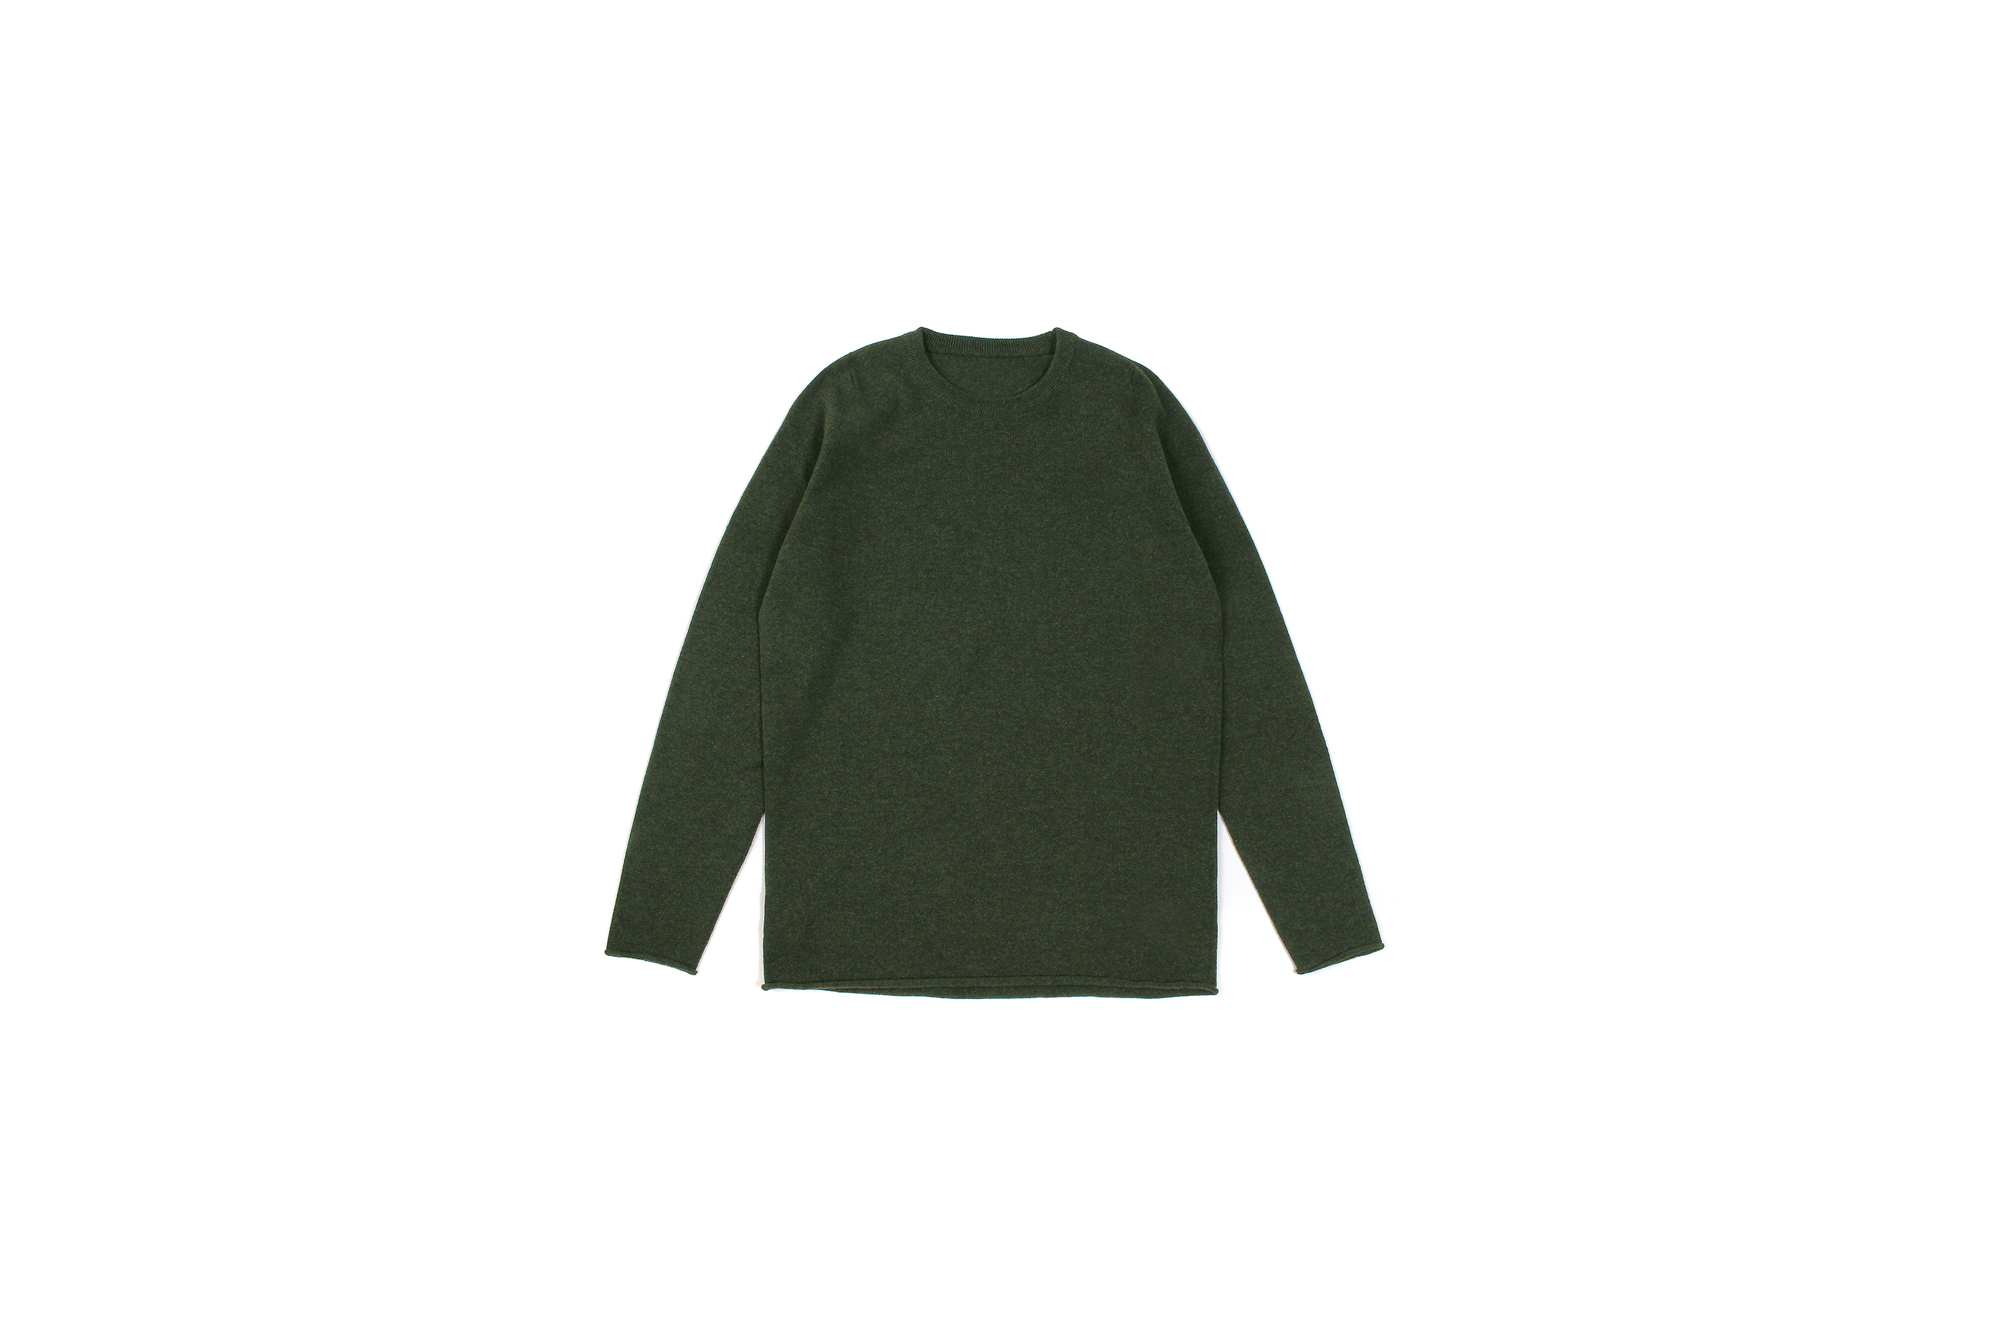 lucien pellat-finet(ルシアン ペラフィネ) Cashmere Crew Neck Sweater カシミア クルーネック